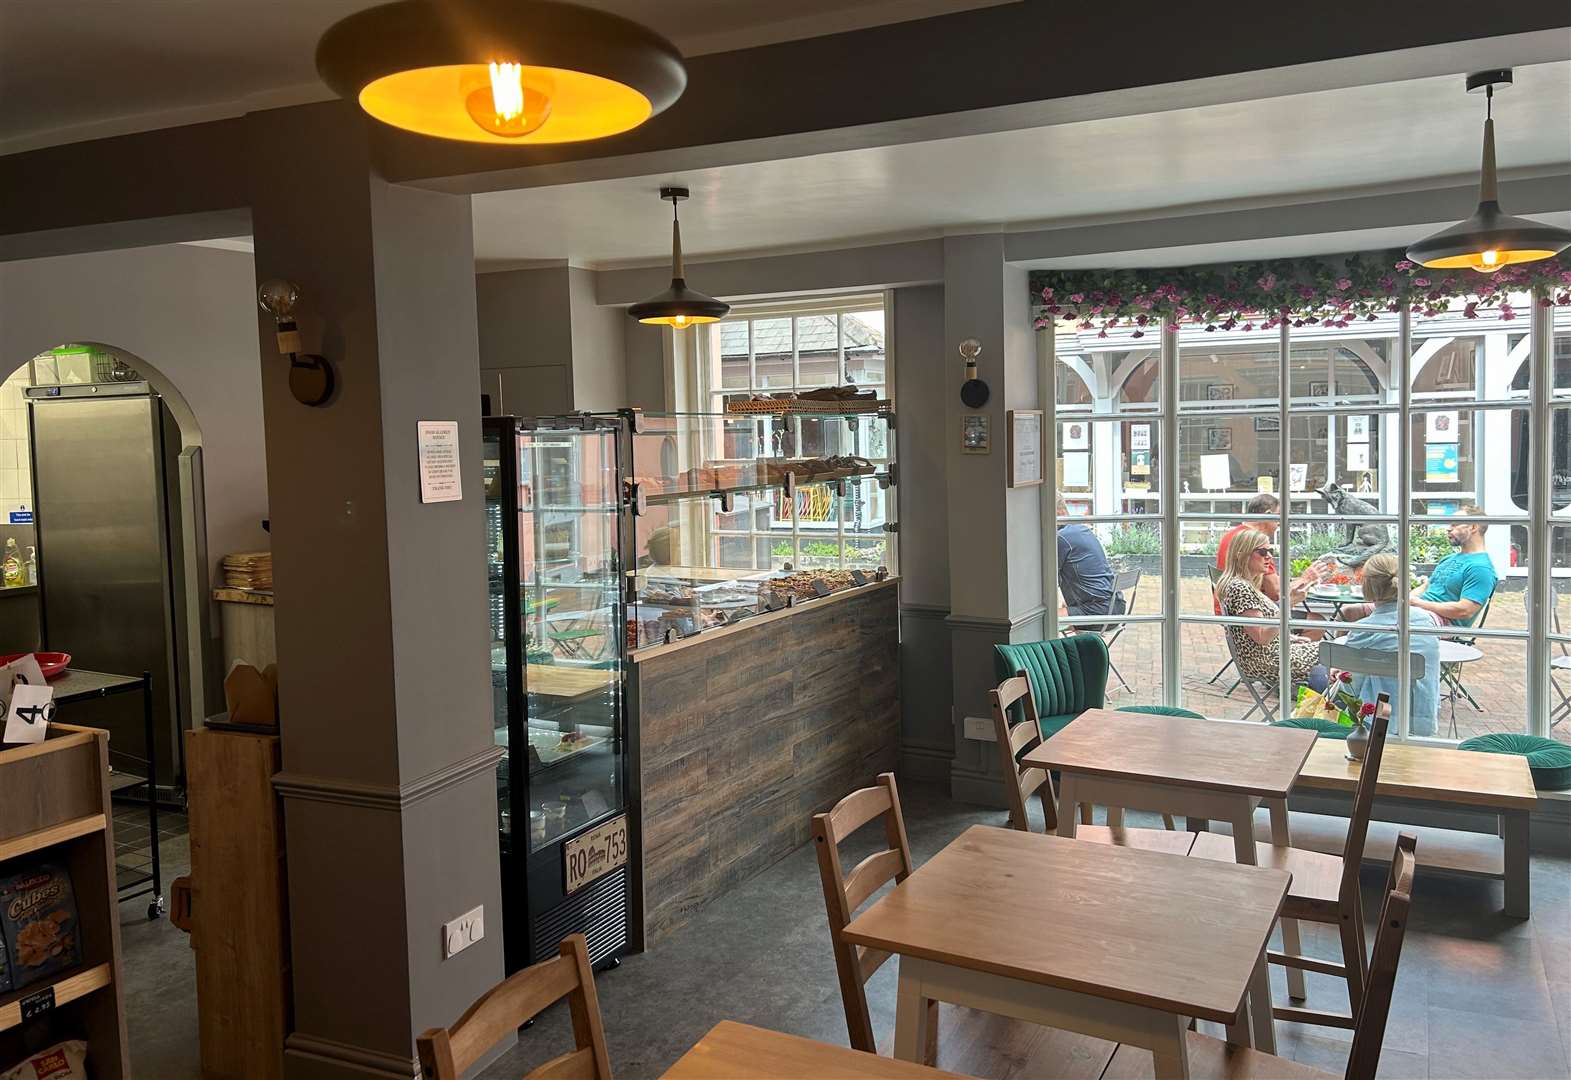 The café has plenty of available seating. Picture: SuffolkNews